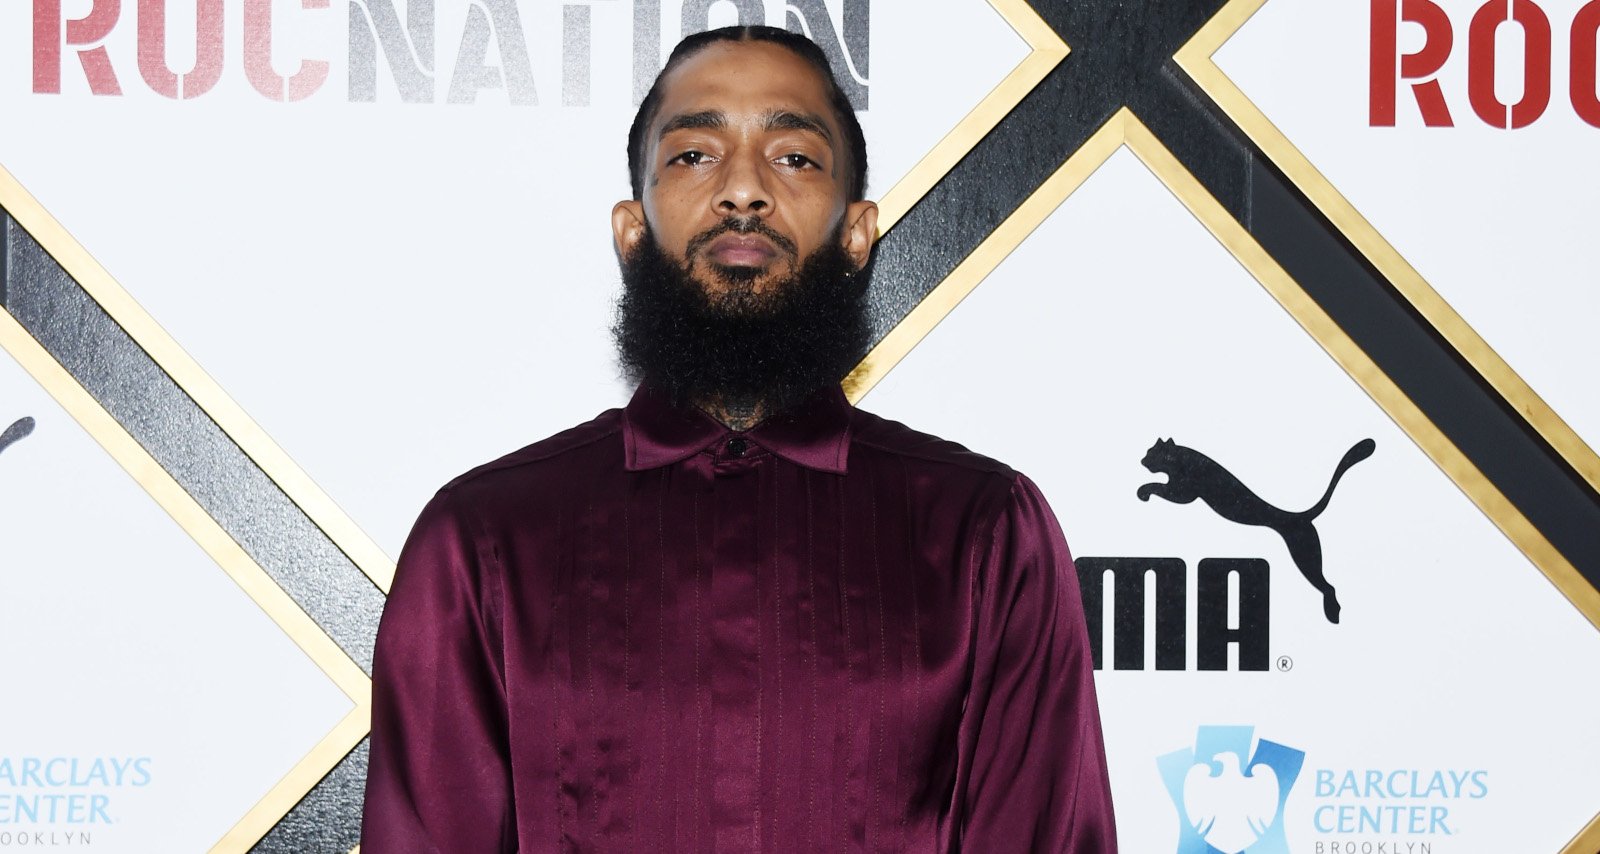 Was Nipsey Hussle Related to Snoop Dogg?